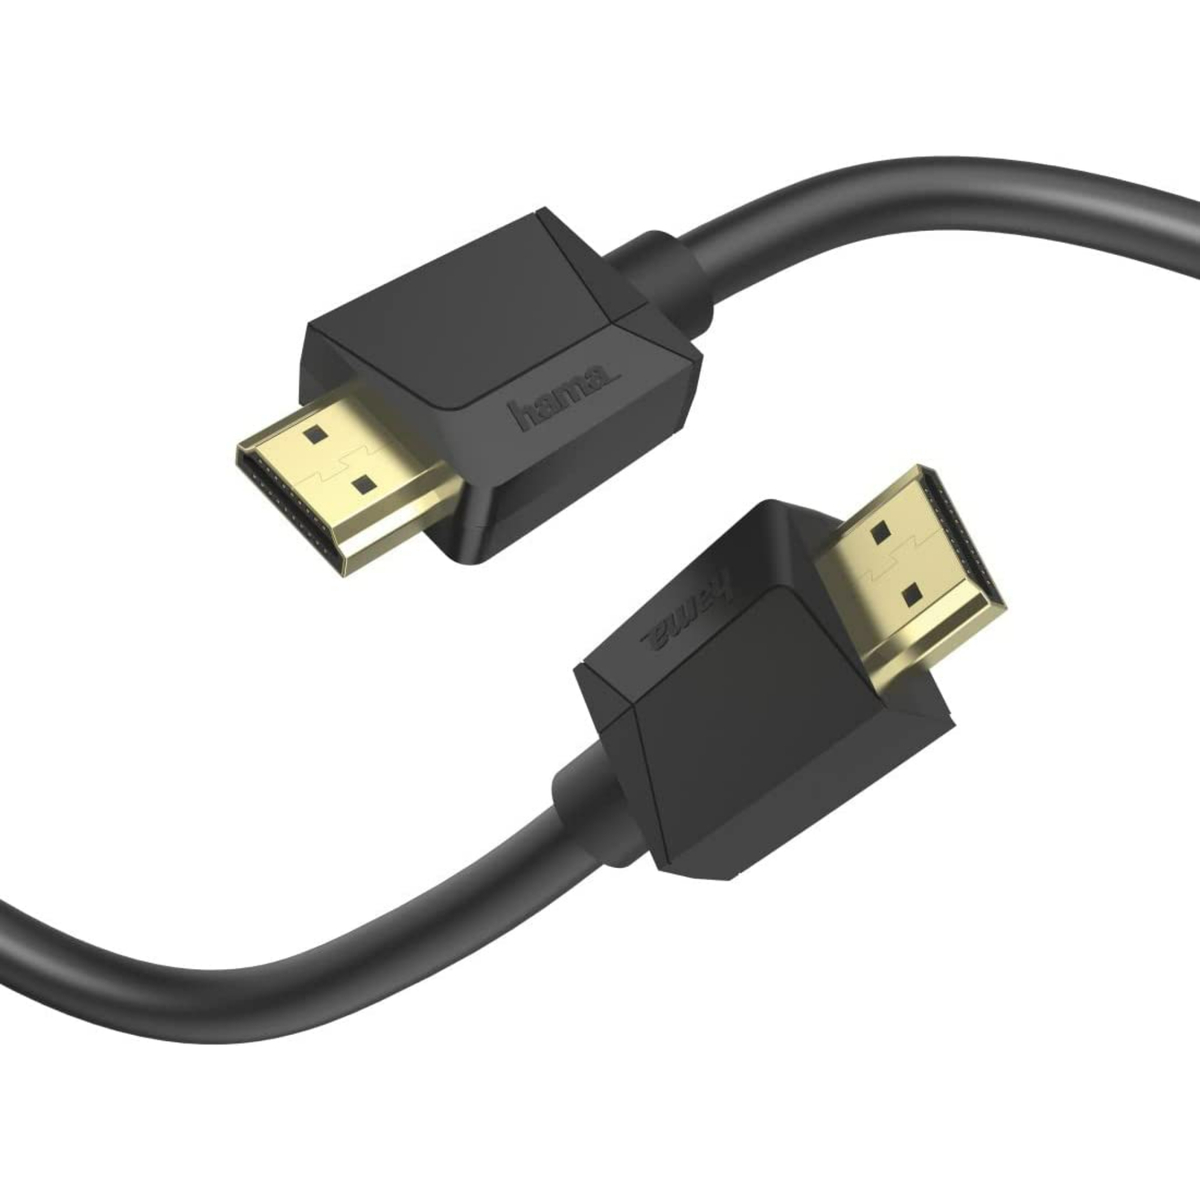 Hama Ultra High Speed HDMI Cable, 8K, 3 m, Black, 205243